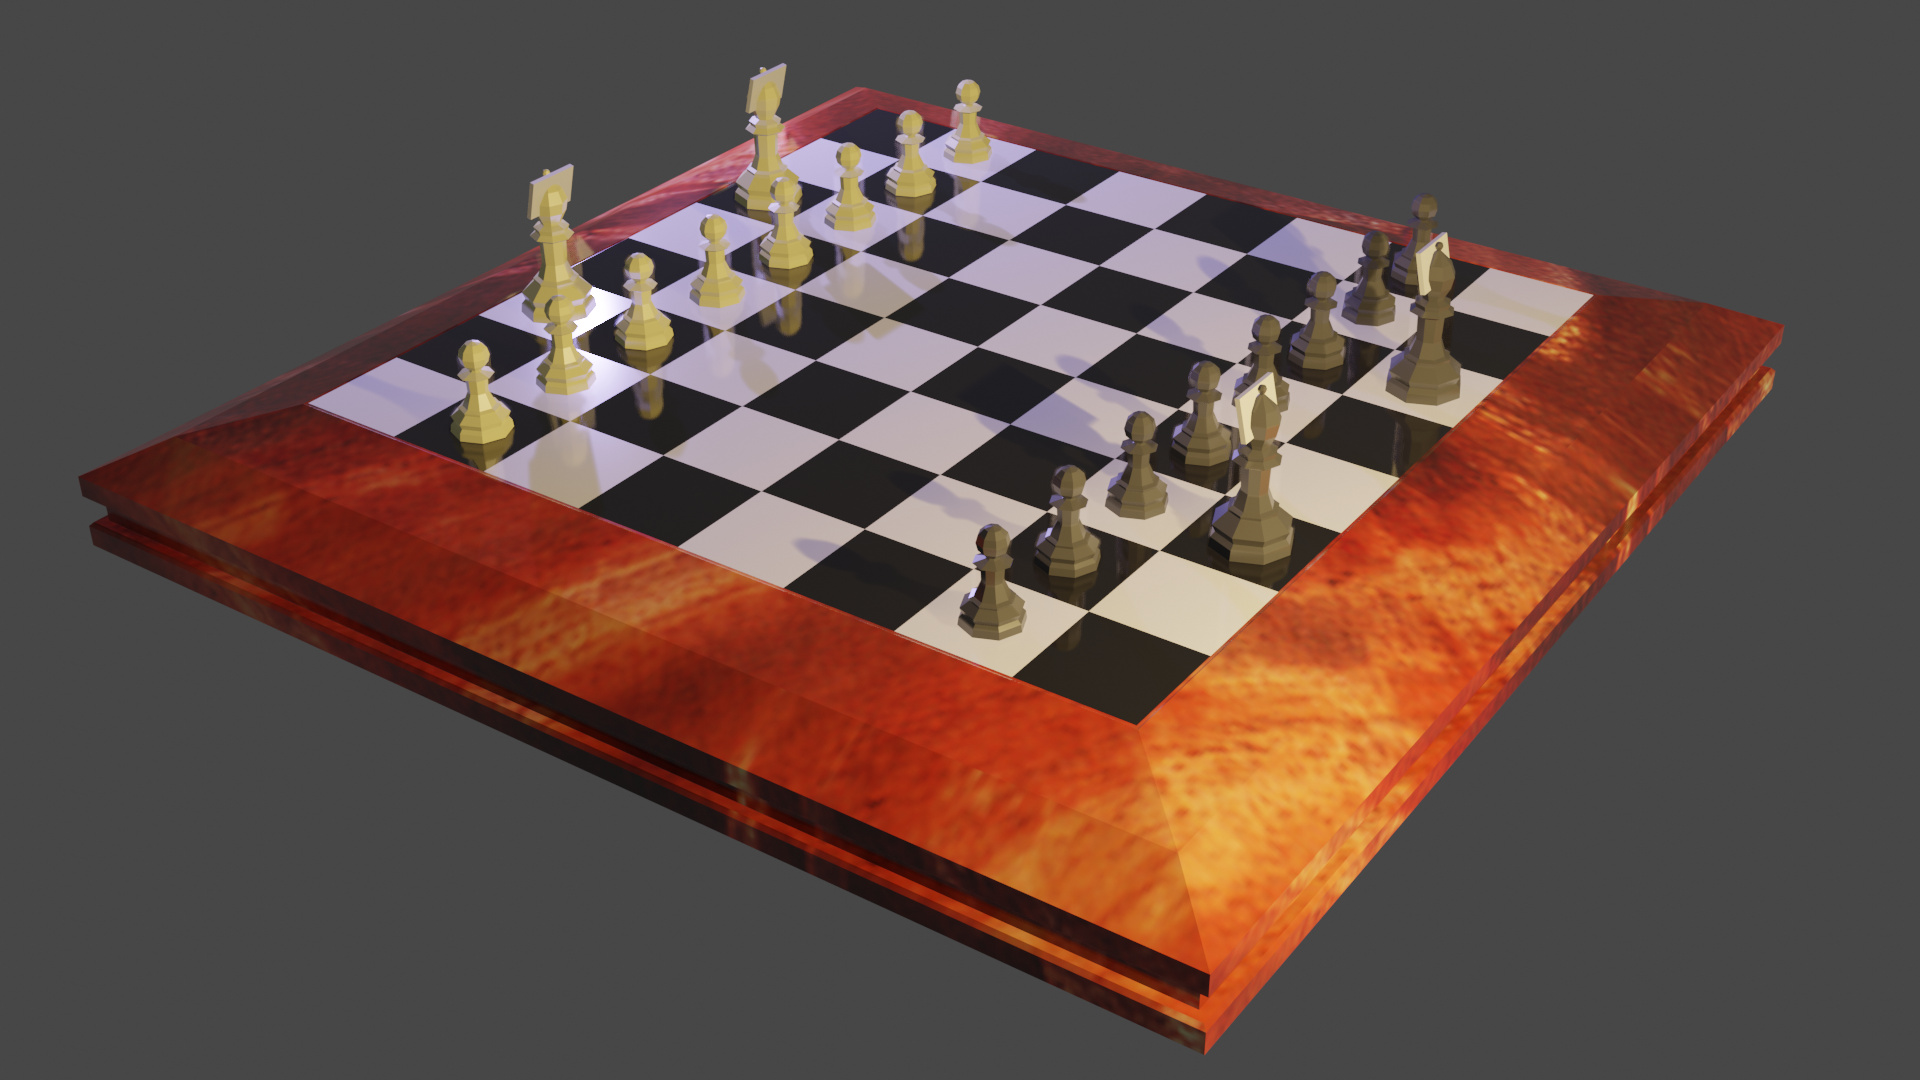 %20Your%20First%20Texture%20-%20Chess%20Board%20-%20WITH%20PIECES-3